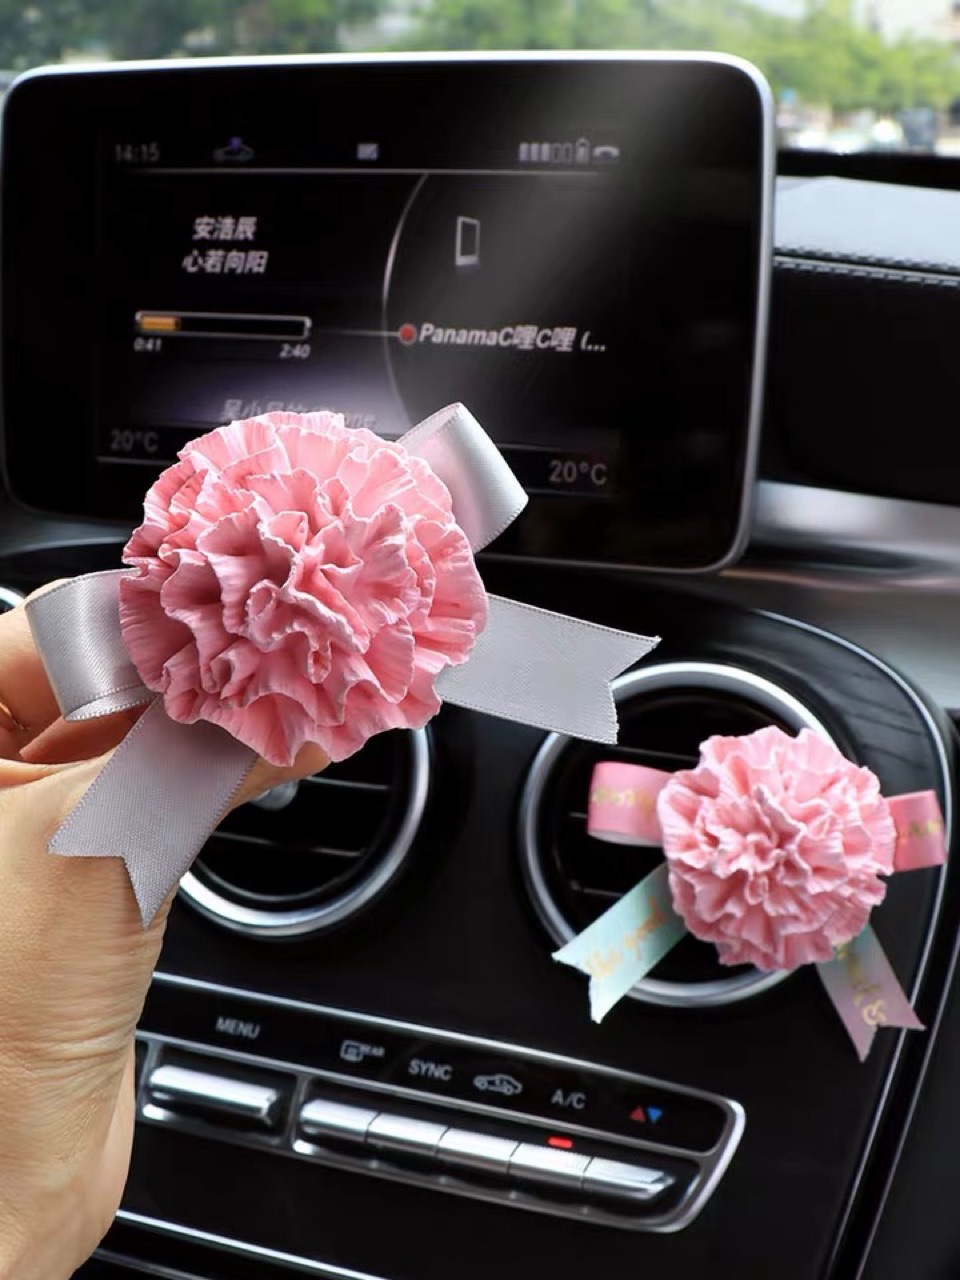 Car Temperament Interior Aromatherapy Perfume Clip Car Air Conditioning Tuyere Cute Bear Outlet Clamp Decoration